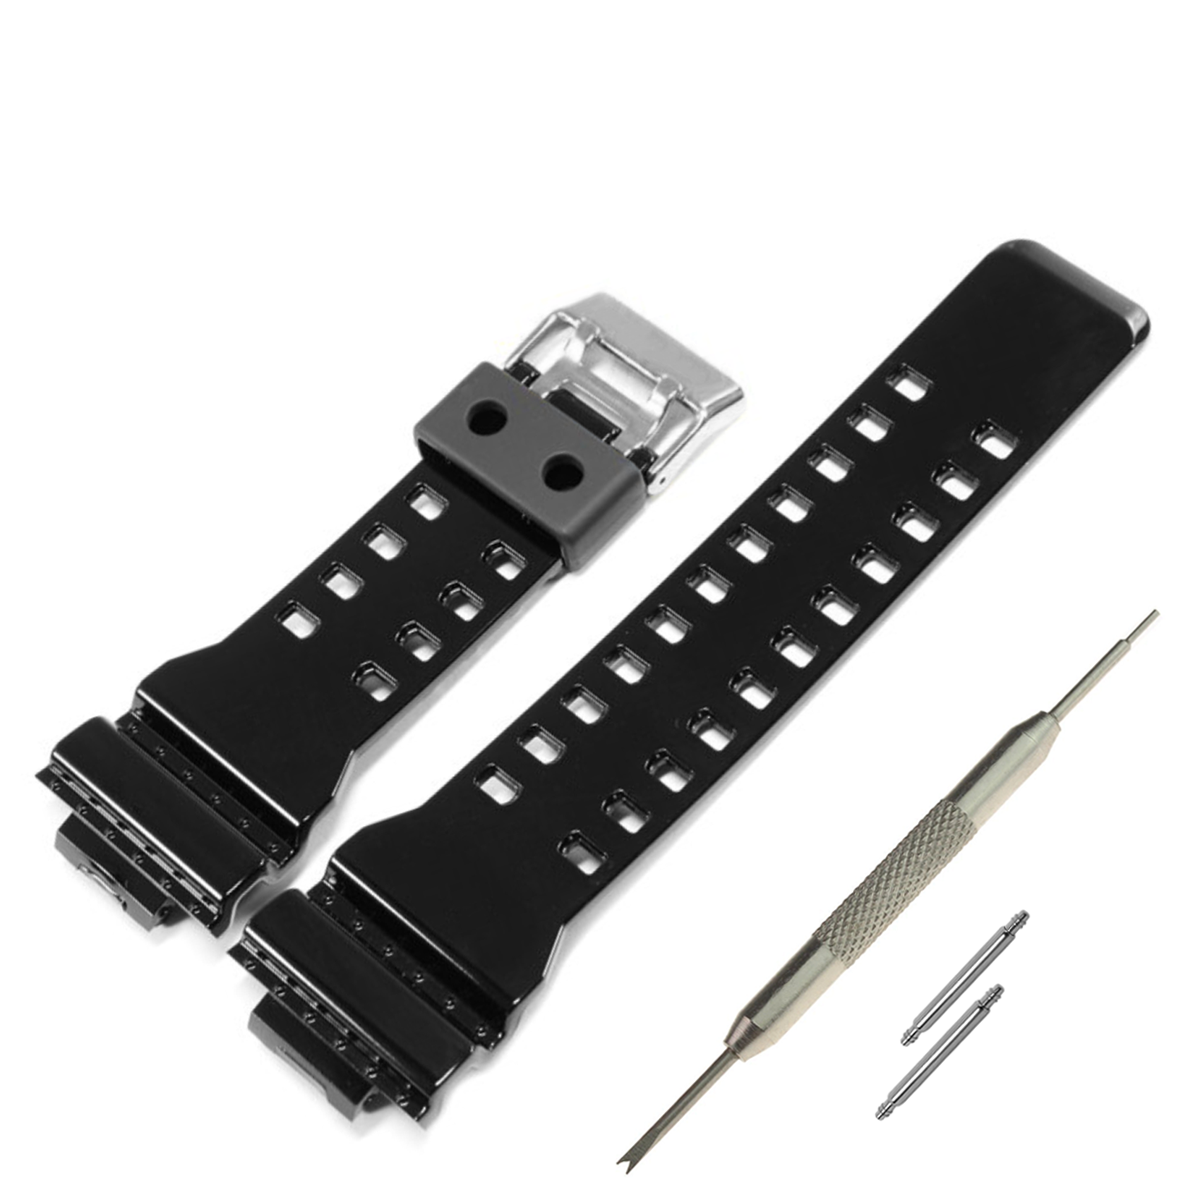 DBLACK [CDS3] 16MM RESIN WATCH STRAP // COMPATIBLE WITH "CASIO" G-SHOCK GD-120, GA-100, GA-110, GA-100C & OTHERS WATCHES